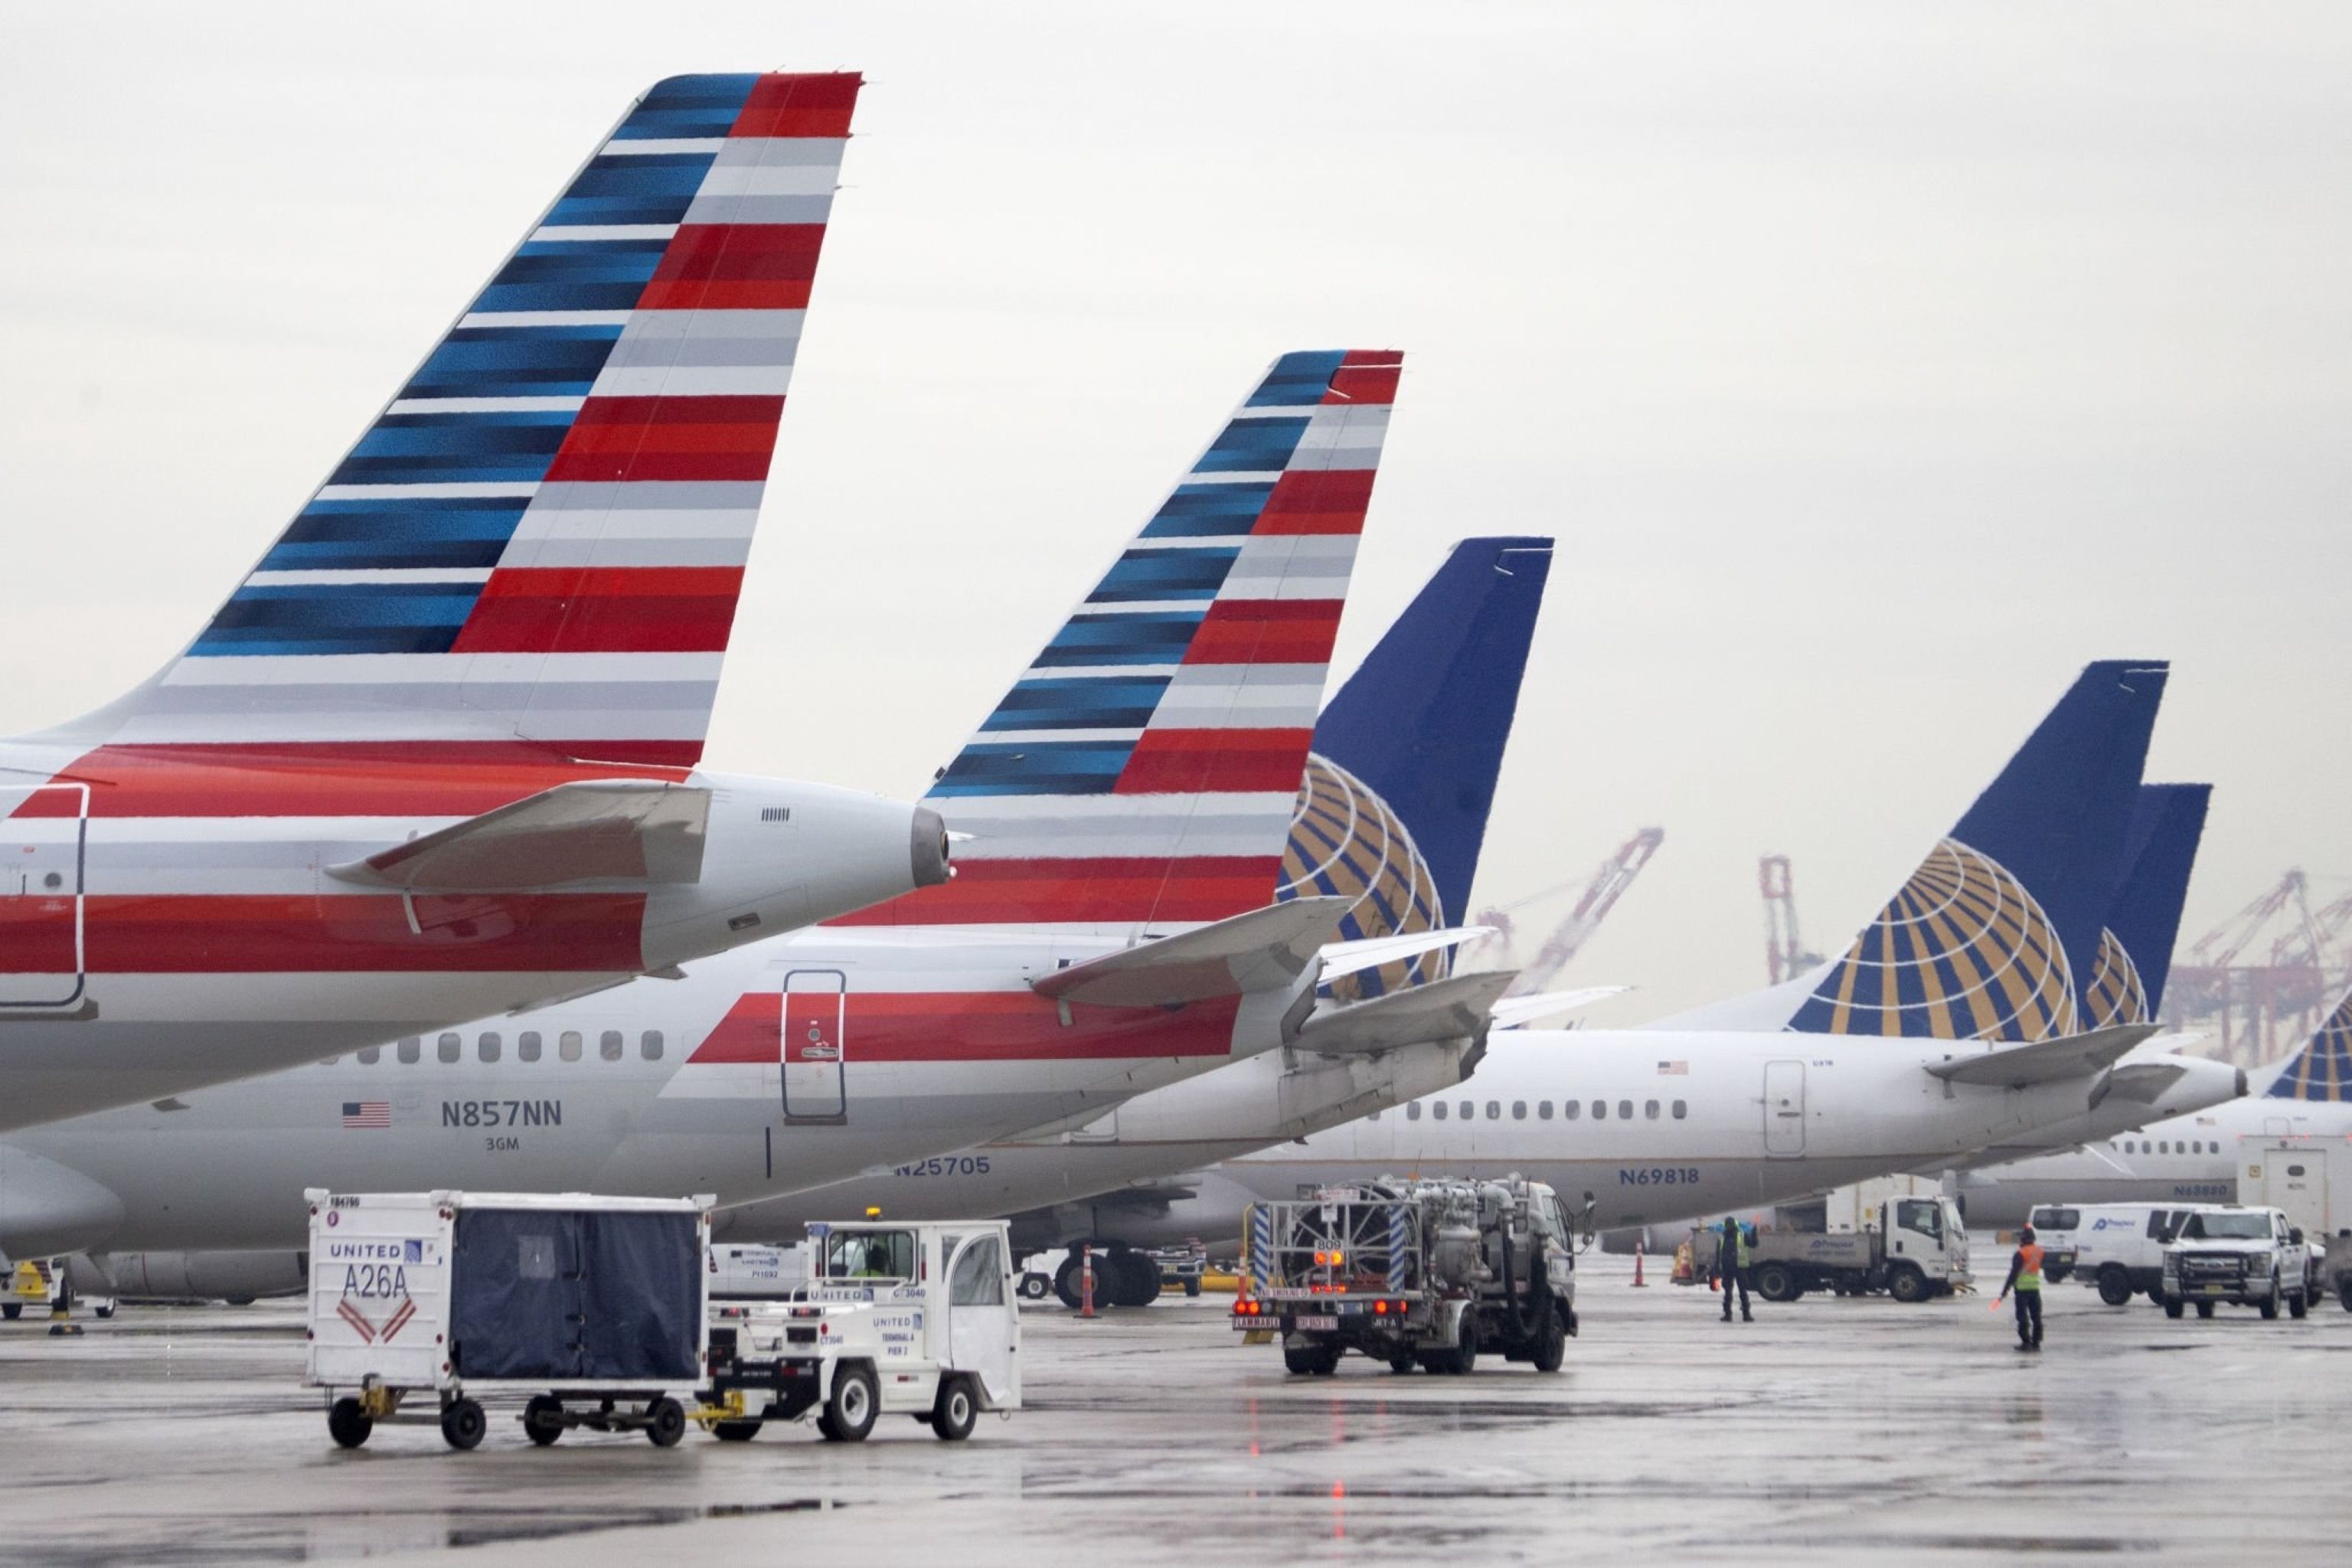 American Airlines and United Airlines jets on the tarmac at Newark Liberty International Airport